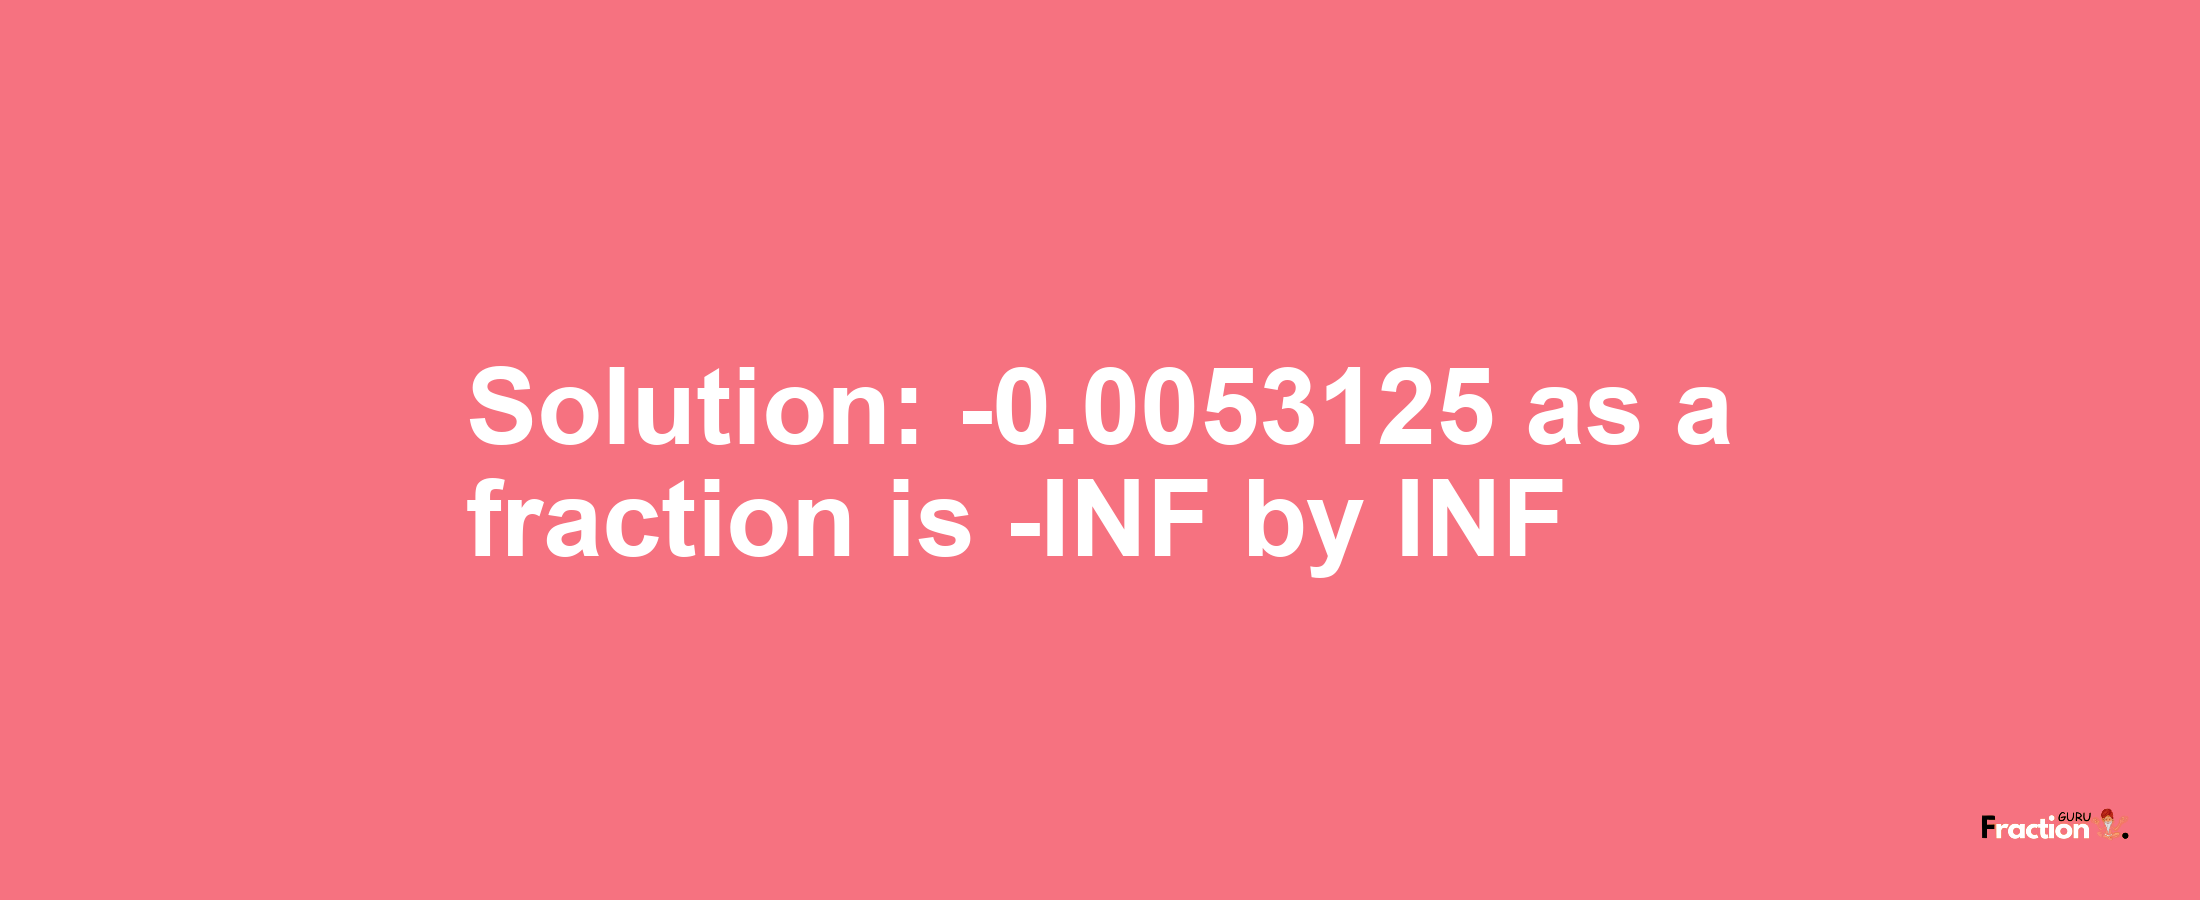 Solution:-0.0053125 as a fraction is -INF/INF